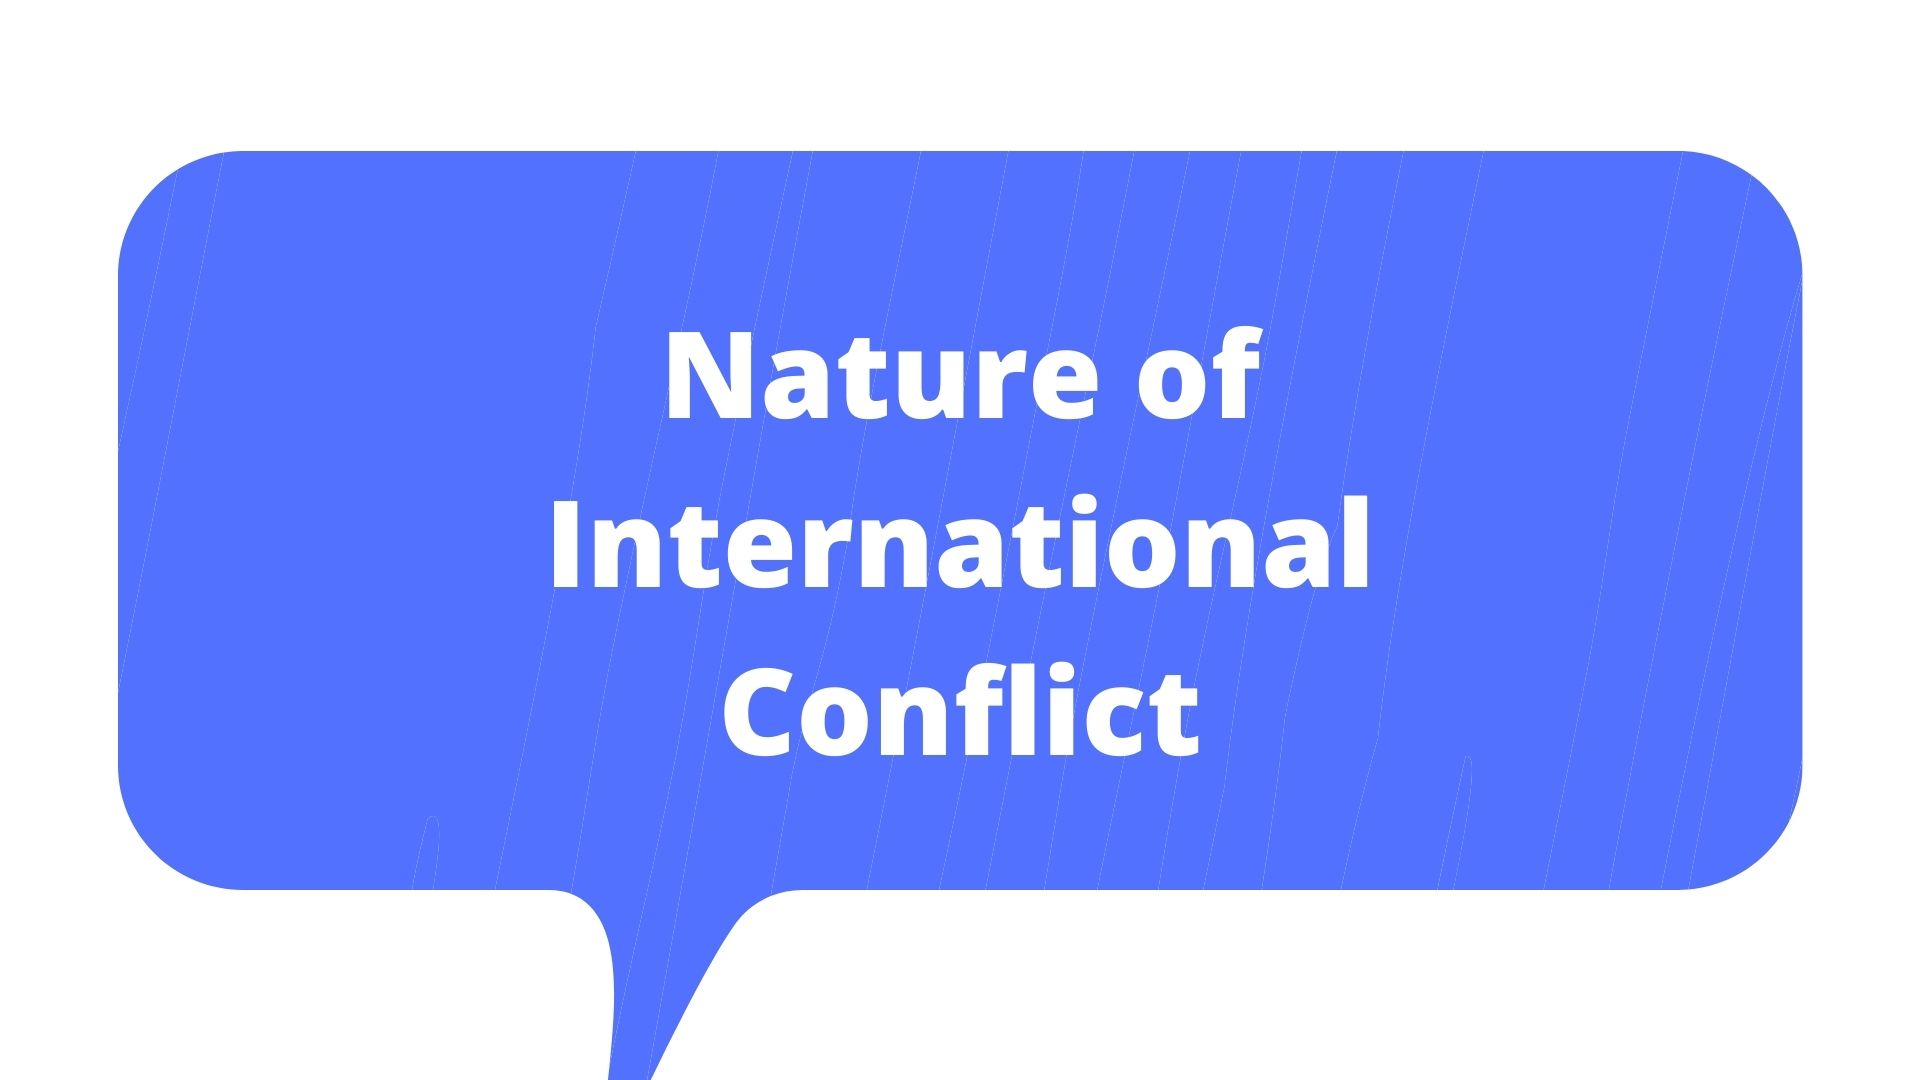 Nature of International Conflict